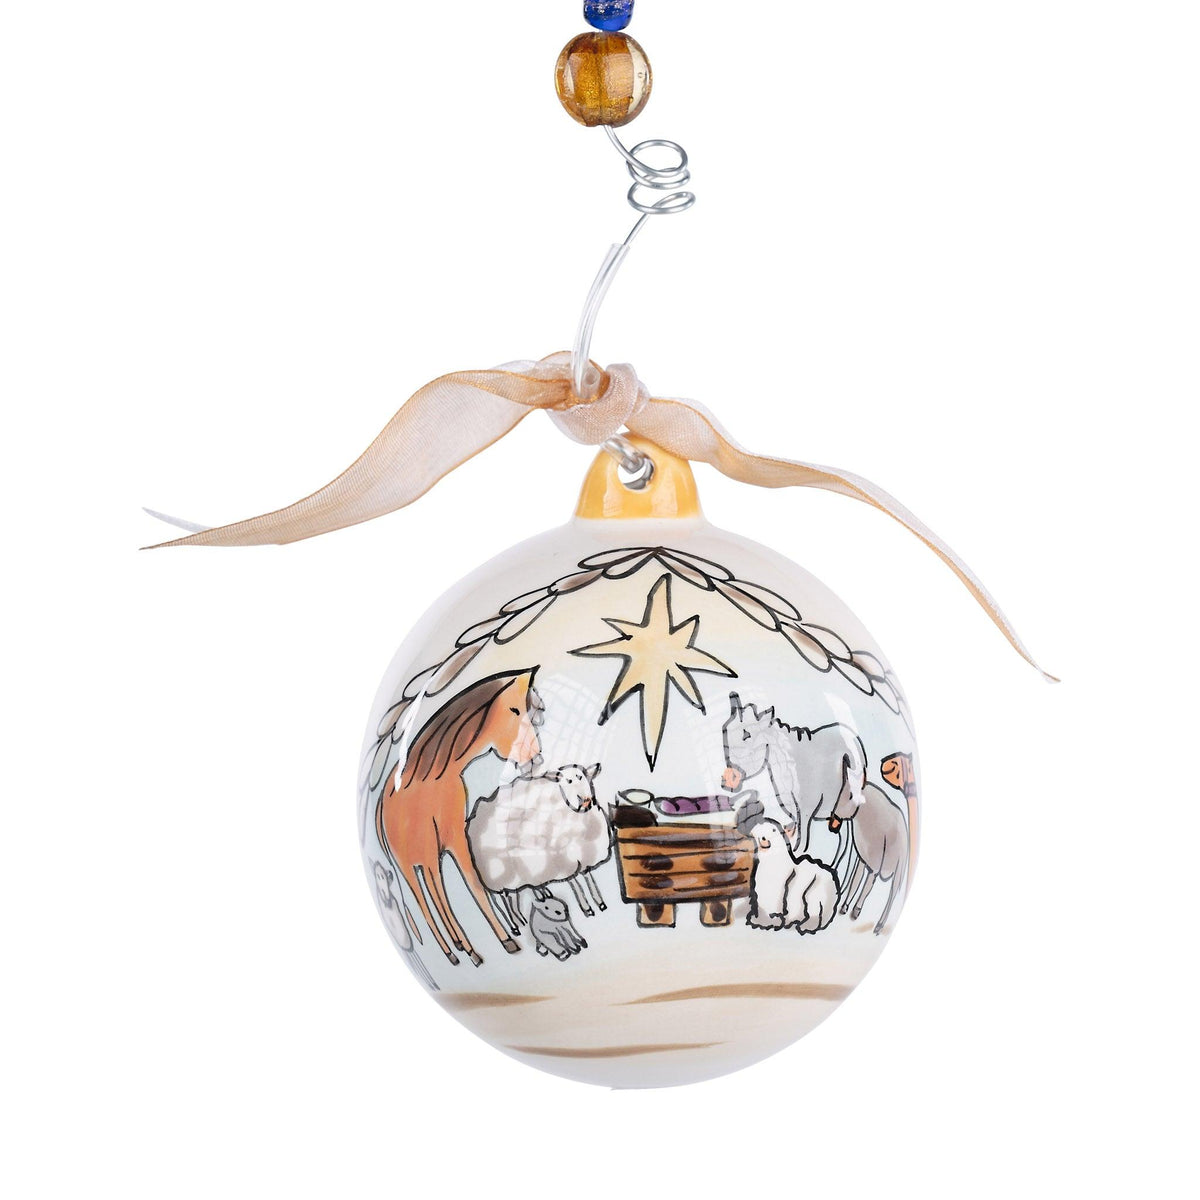 Thrill of Hope with Animals Ornament - GLORY HAUS 